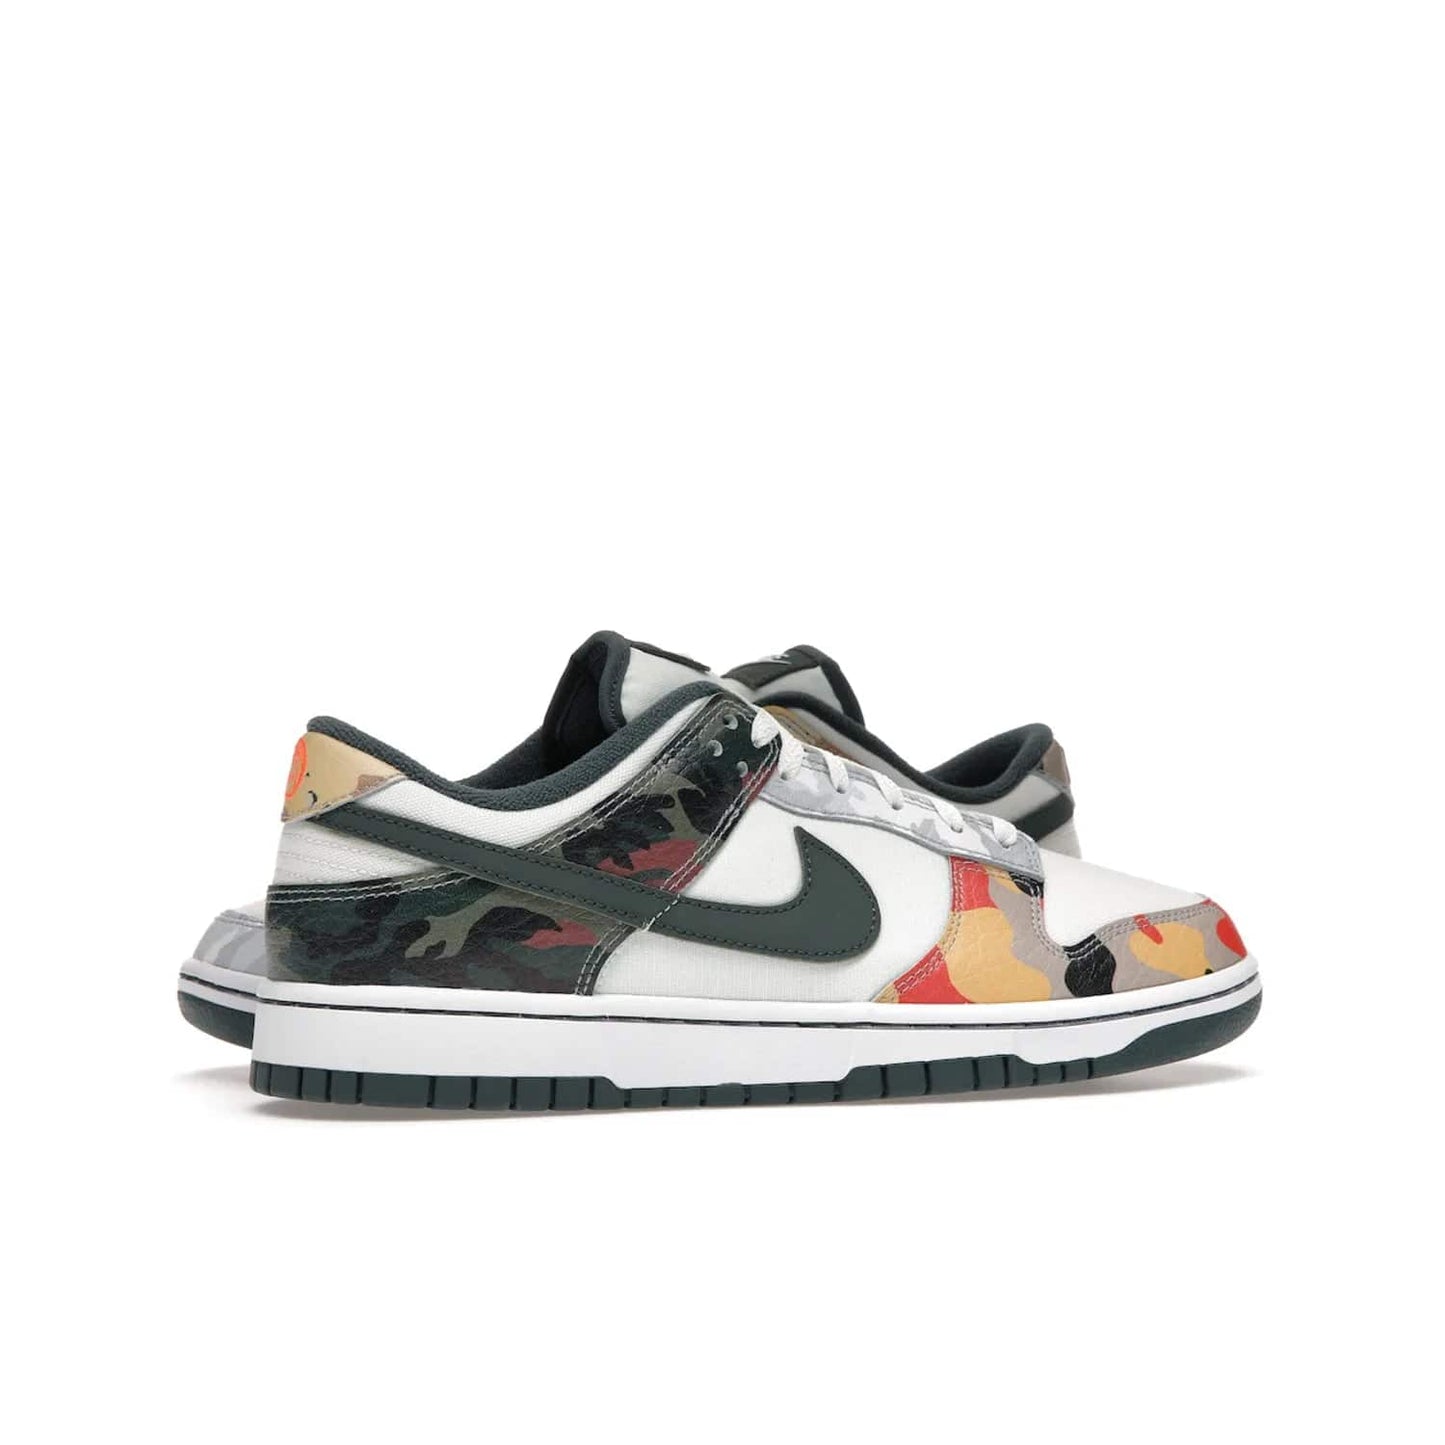 Nike Dunk Low SE Sail Multi-Camo - Image 35 - Only at www.BallersClubKickz.com - Classic design meets statement style in the Nike Dunk Low SE Sail Multi-Camo. White leather base with multi-color camo overlays, vibrant Nike Swooshes, and orange Nike embroidery. Get yours August 2021.